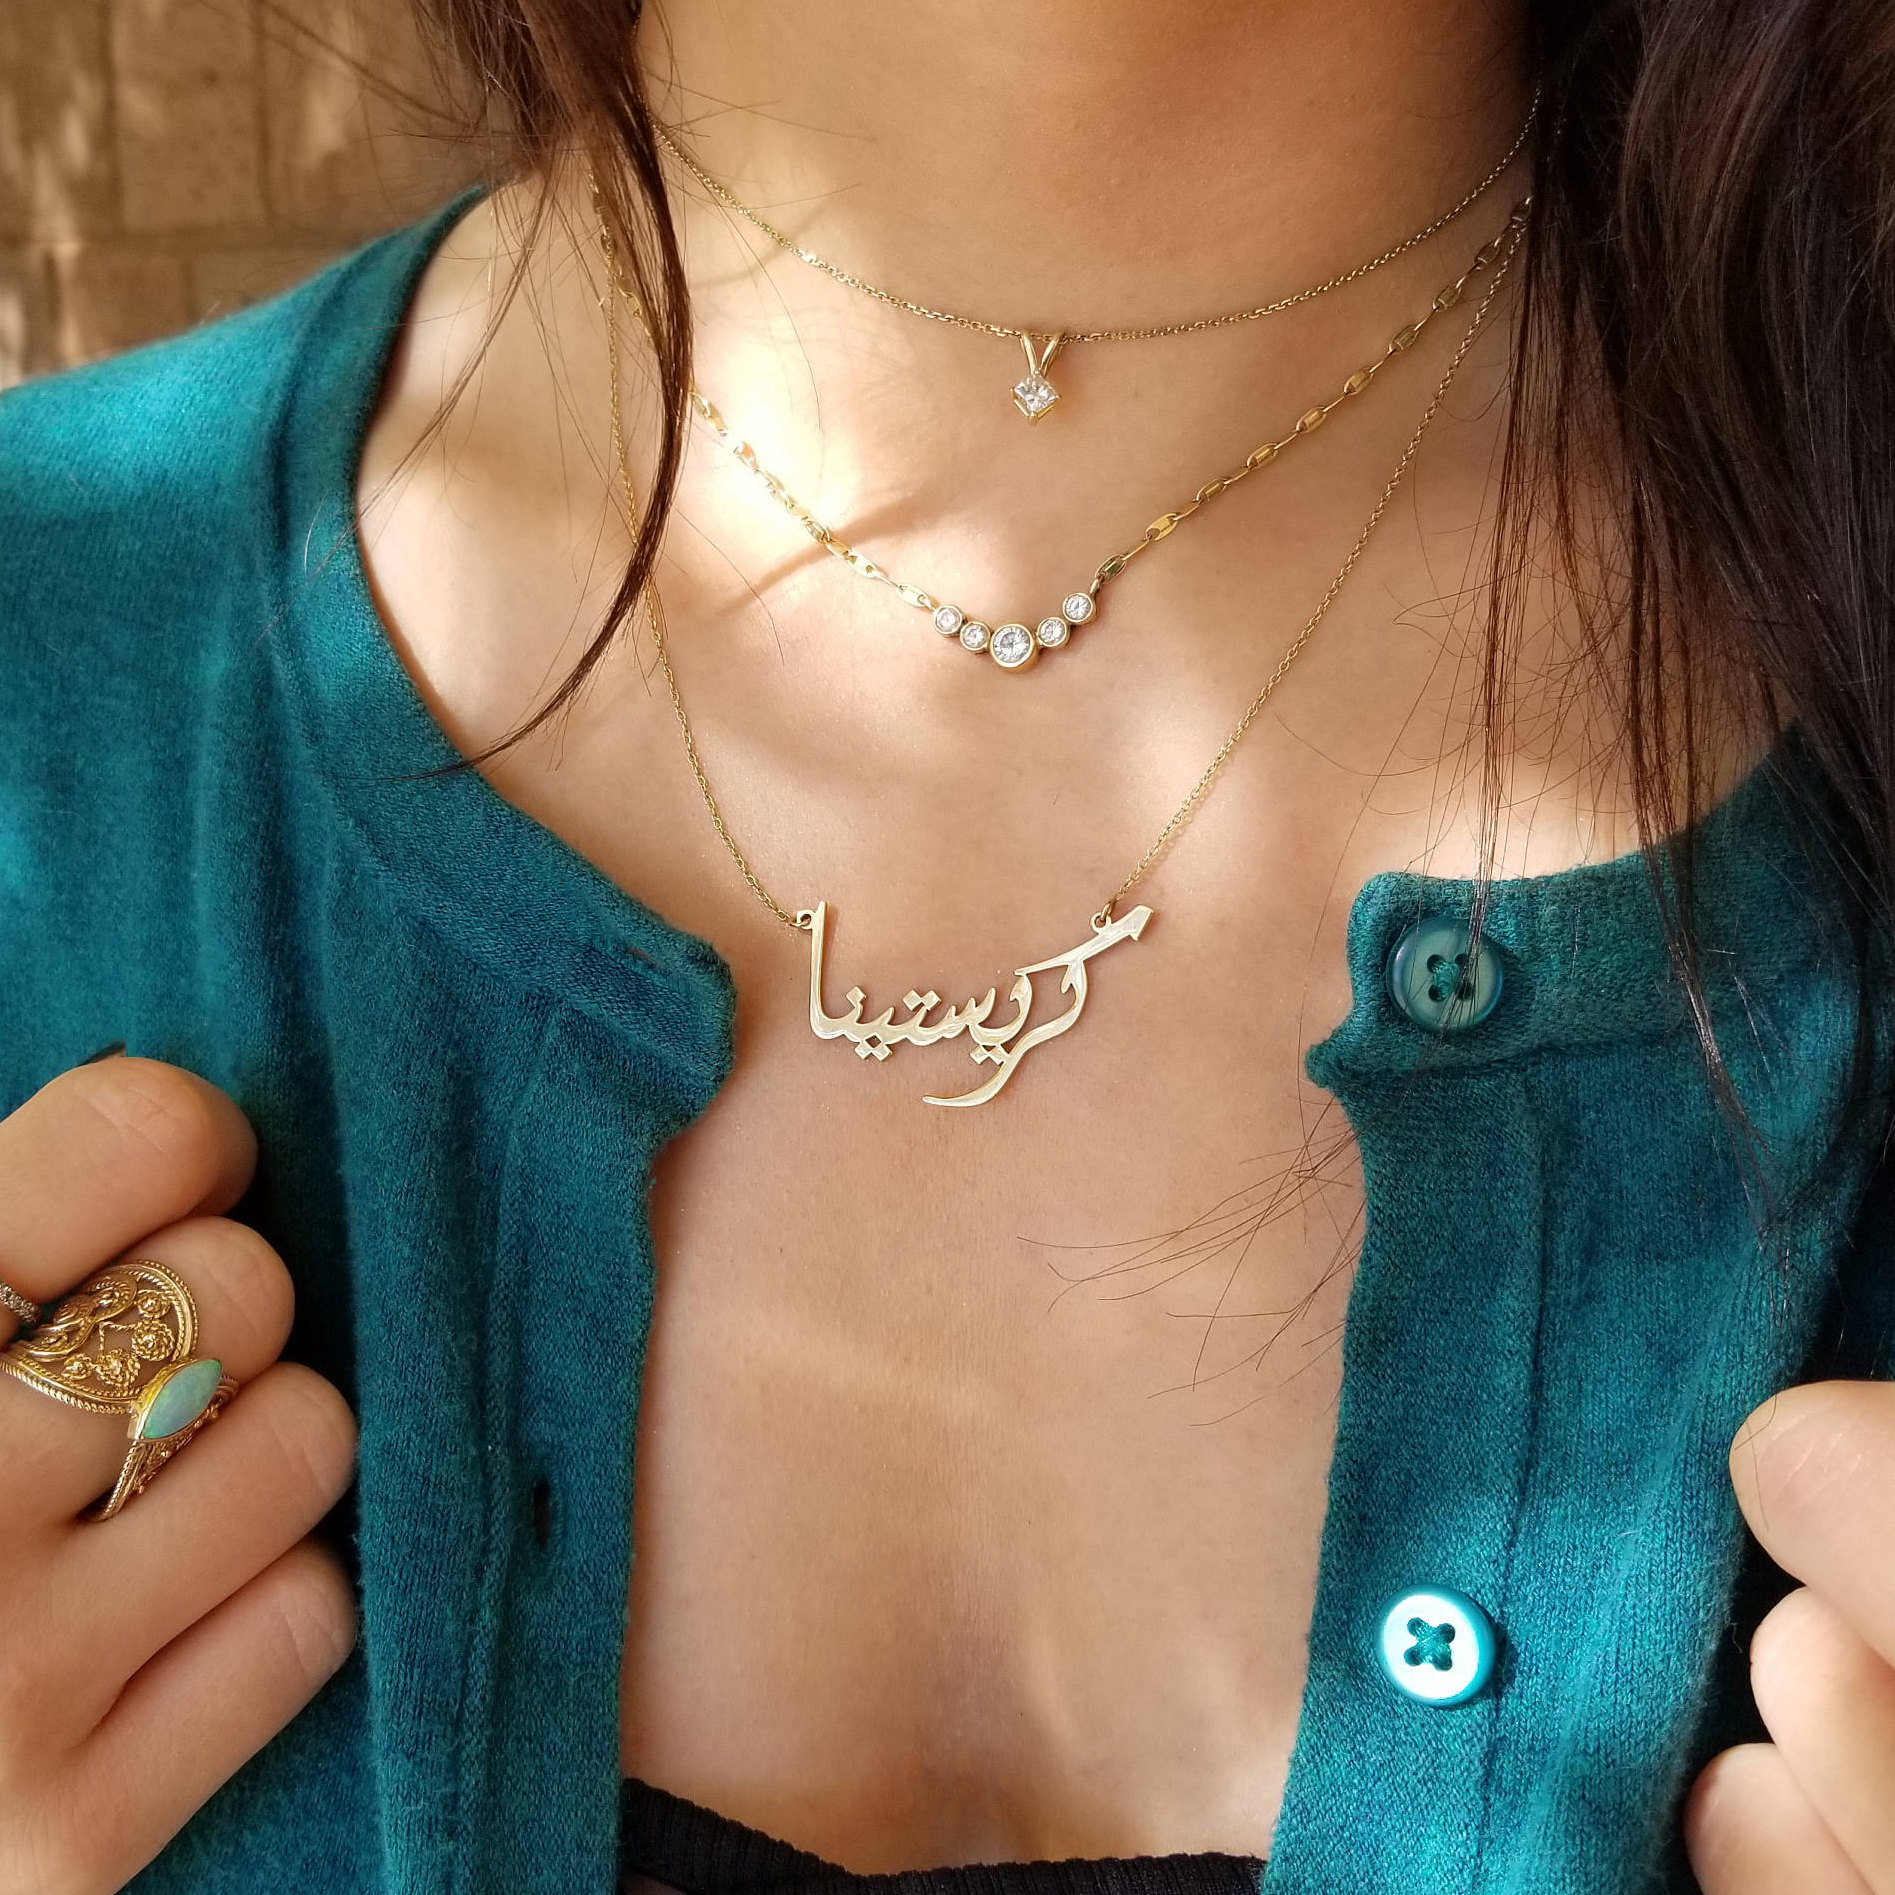 Personalized Arabic Name Necklace (Picture Upload)